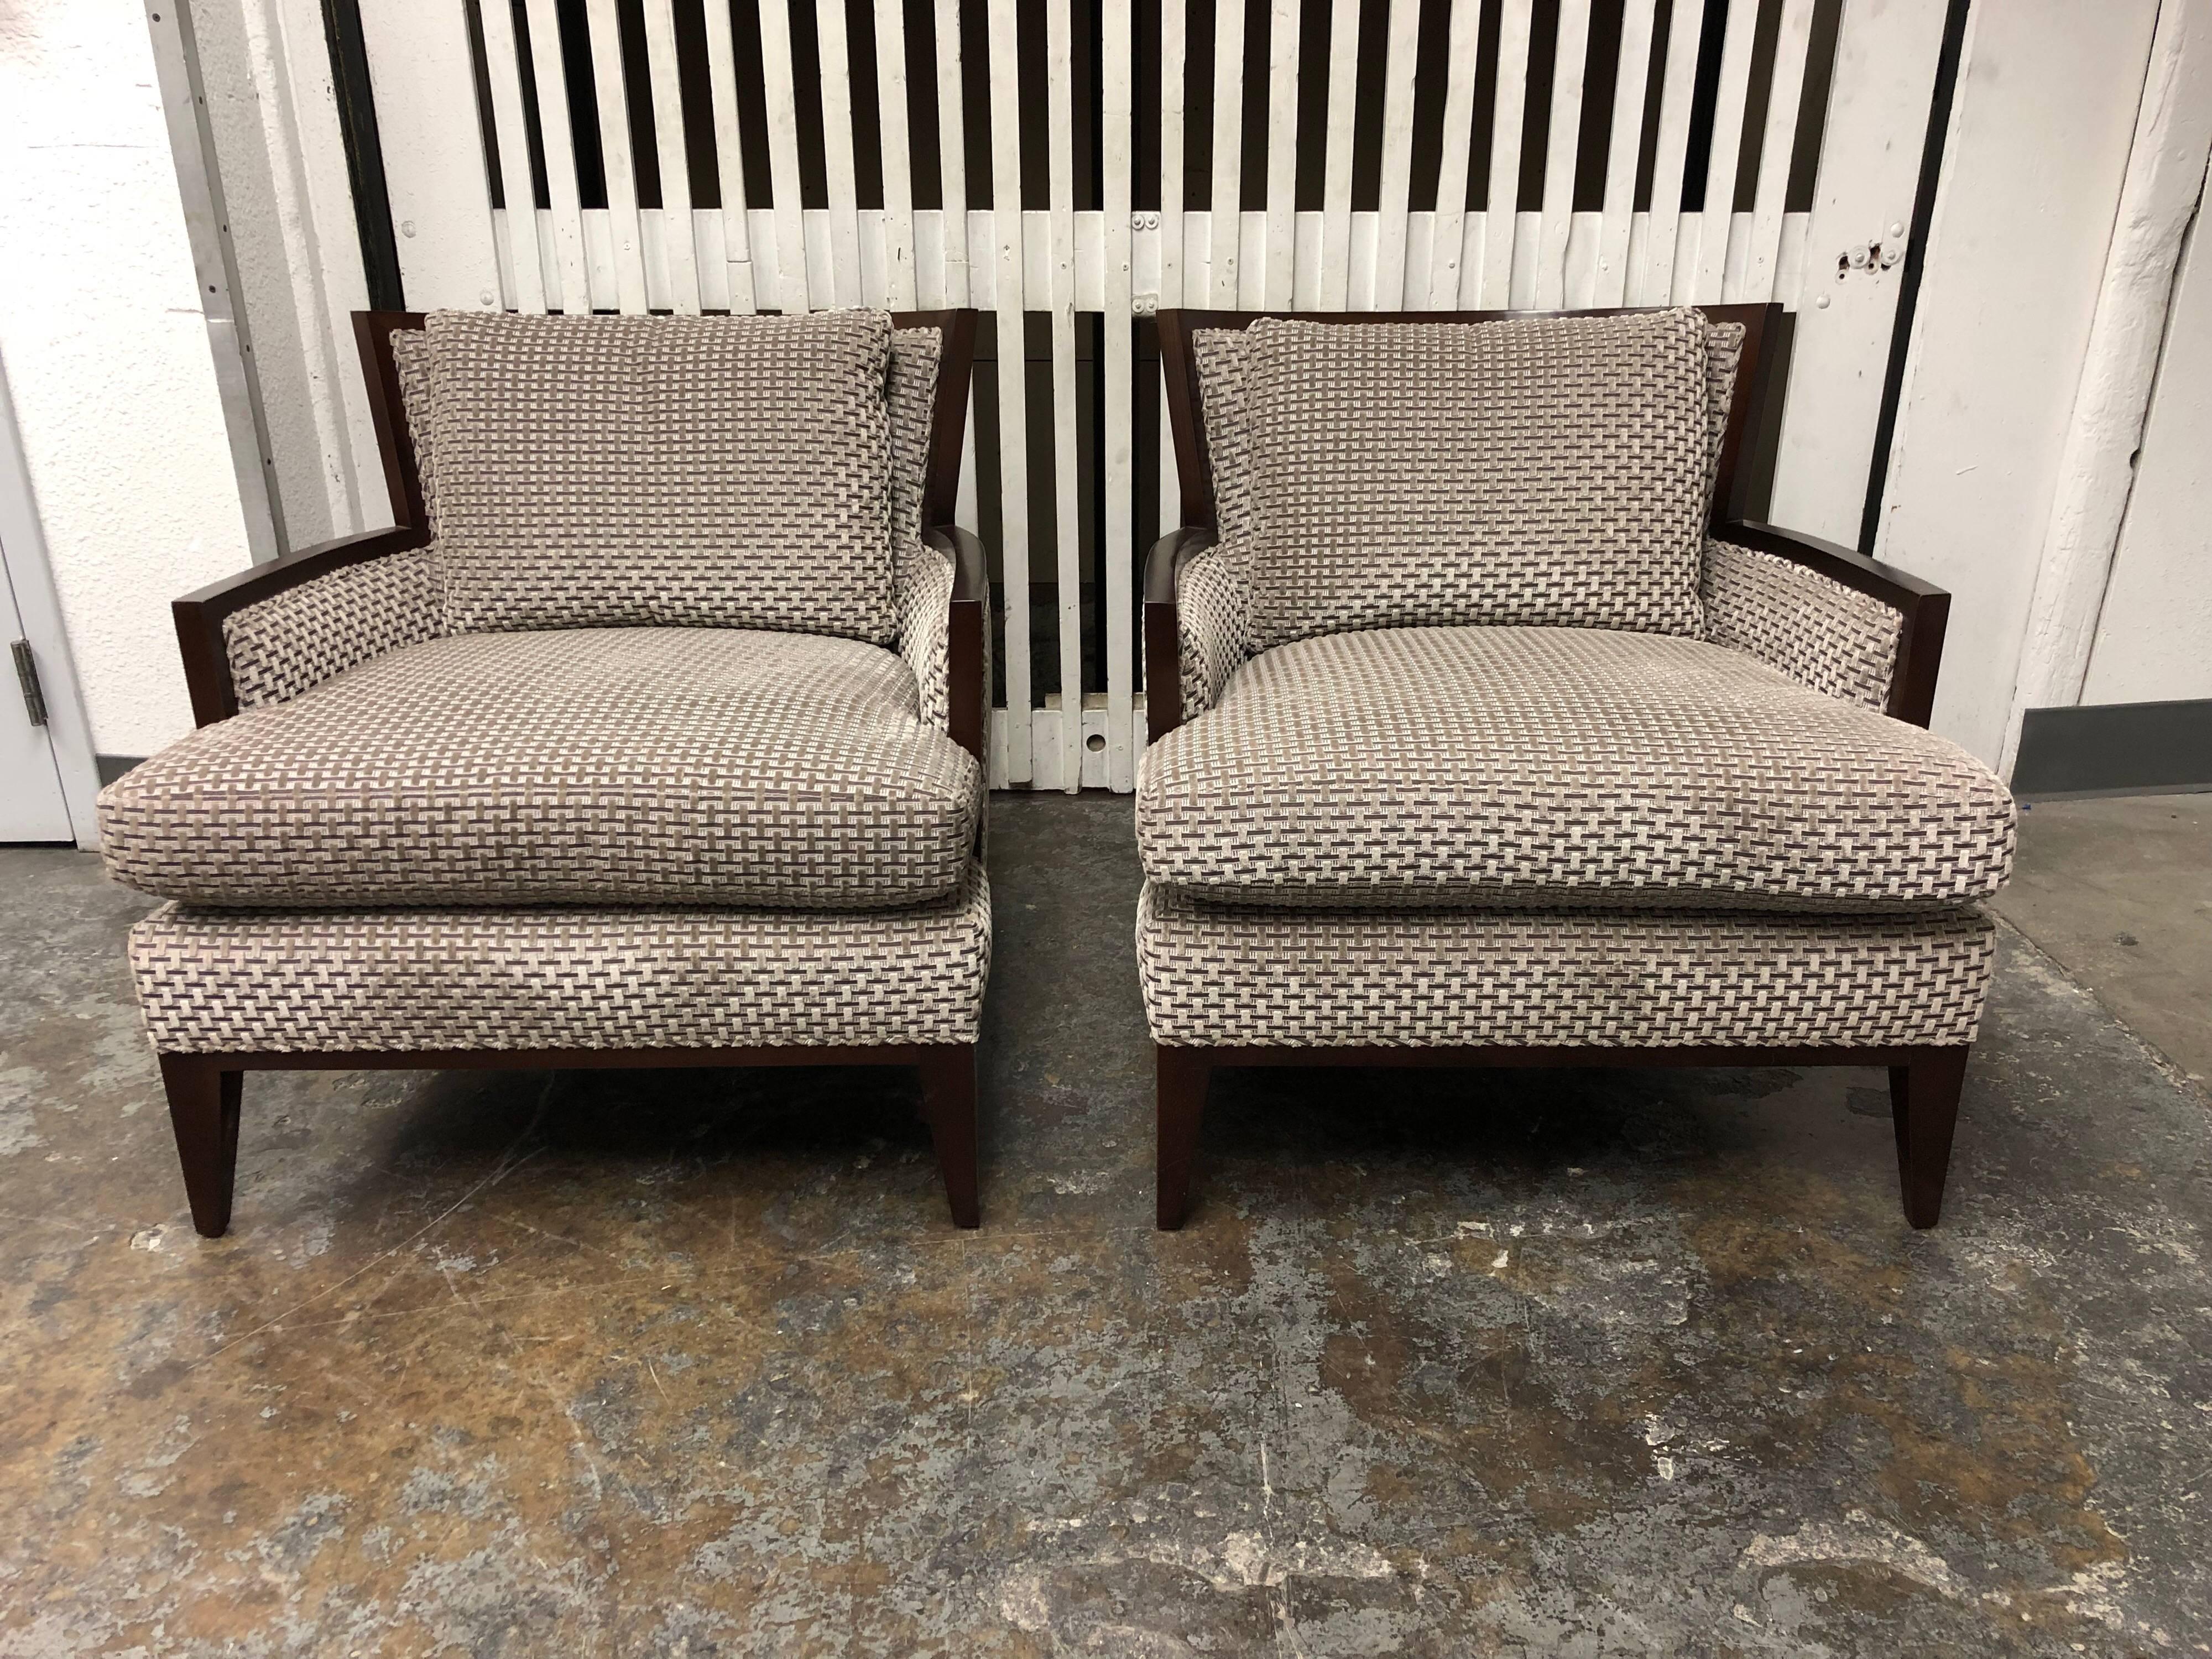 A pair of California lounge chairs by Baker furniture. Designed by Barbara Barry. upholstered in basket weave textured gray velvet fabric. The wood frame is in a brunette finish. Seating and back cushion are removable, cushions are feather down